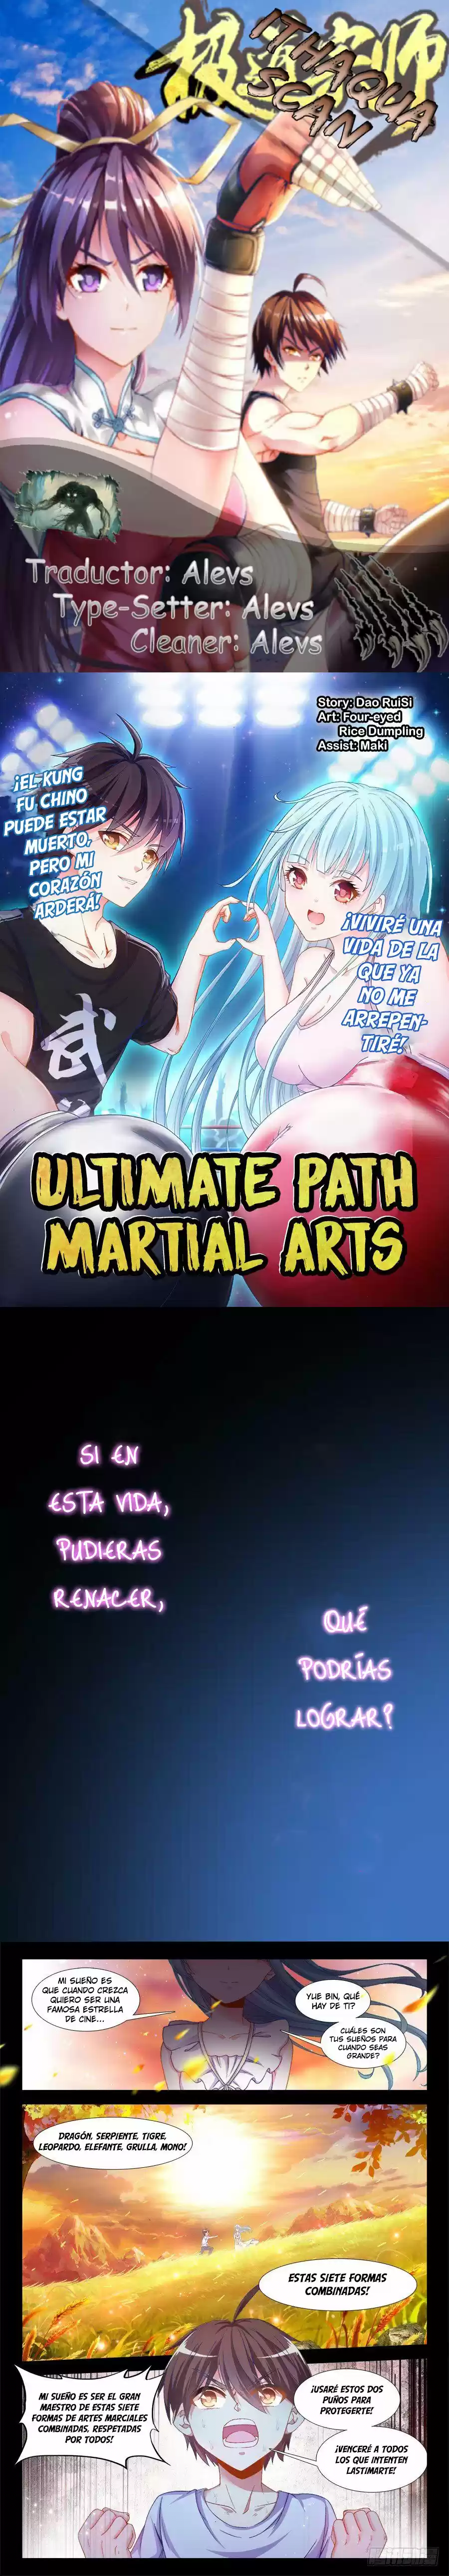 Ultimate Path Martial Arts: Chapter 1 - Page 1